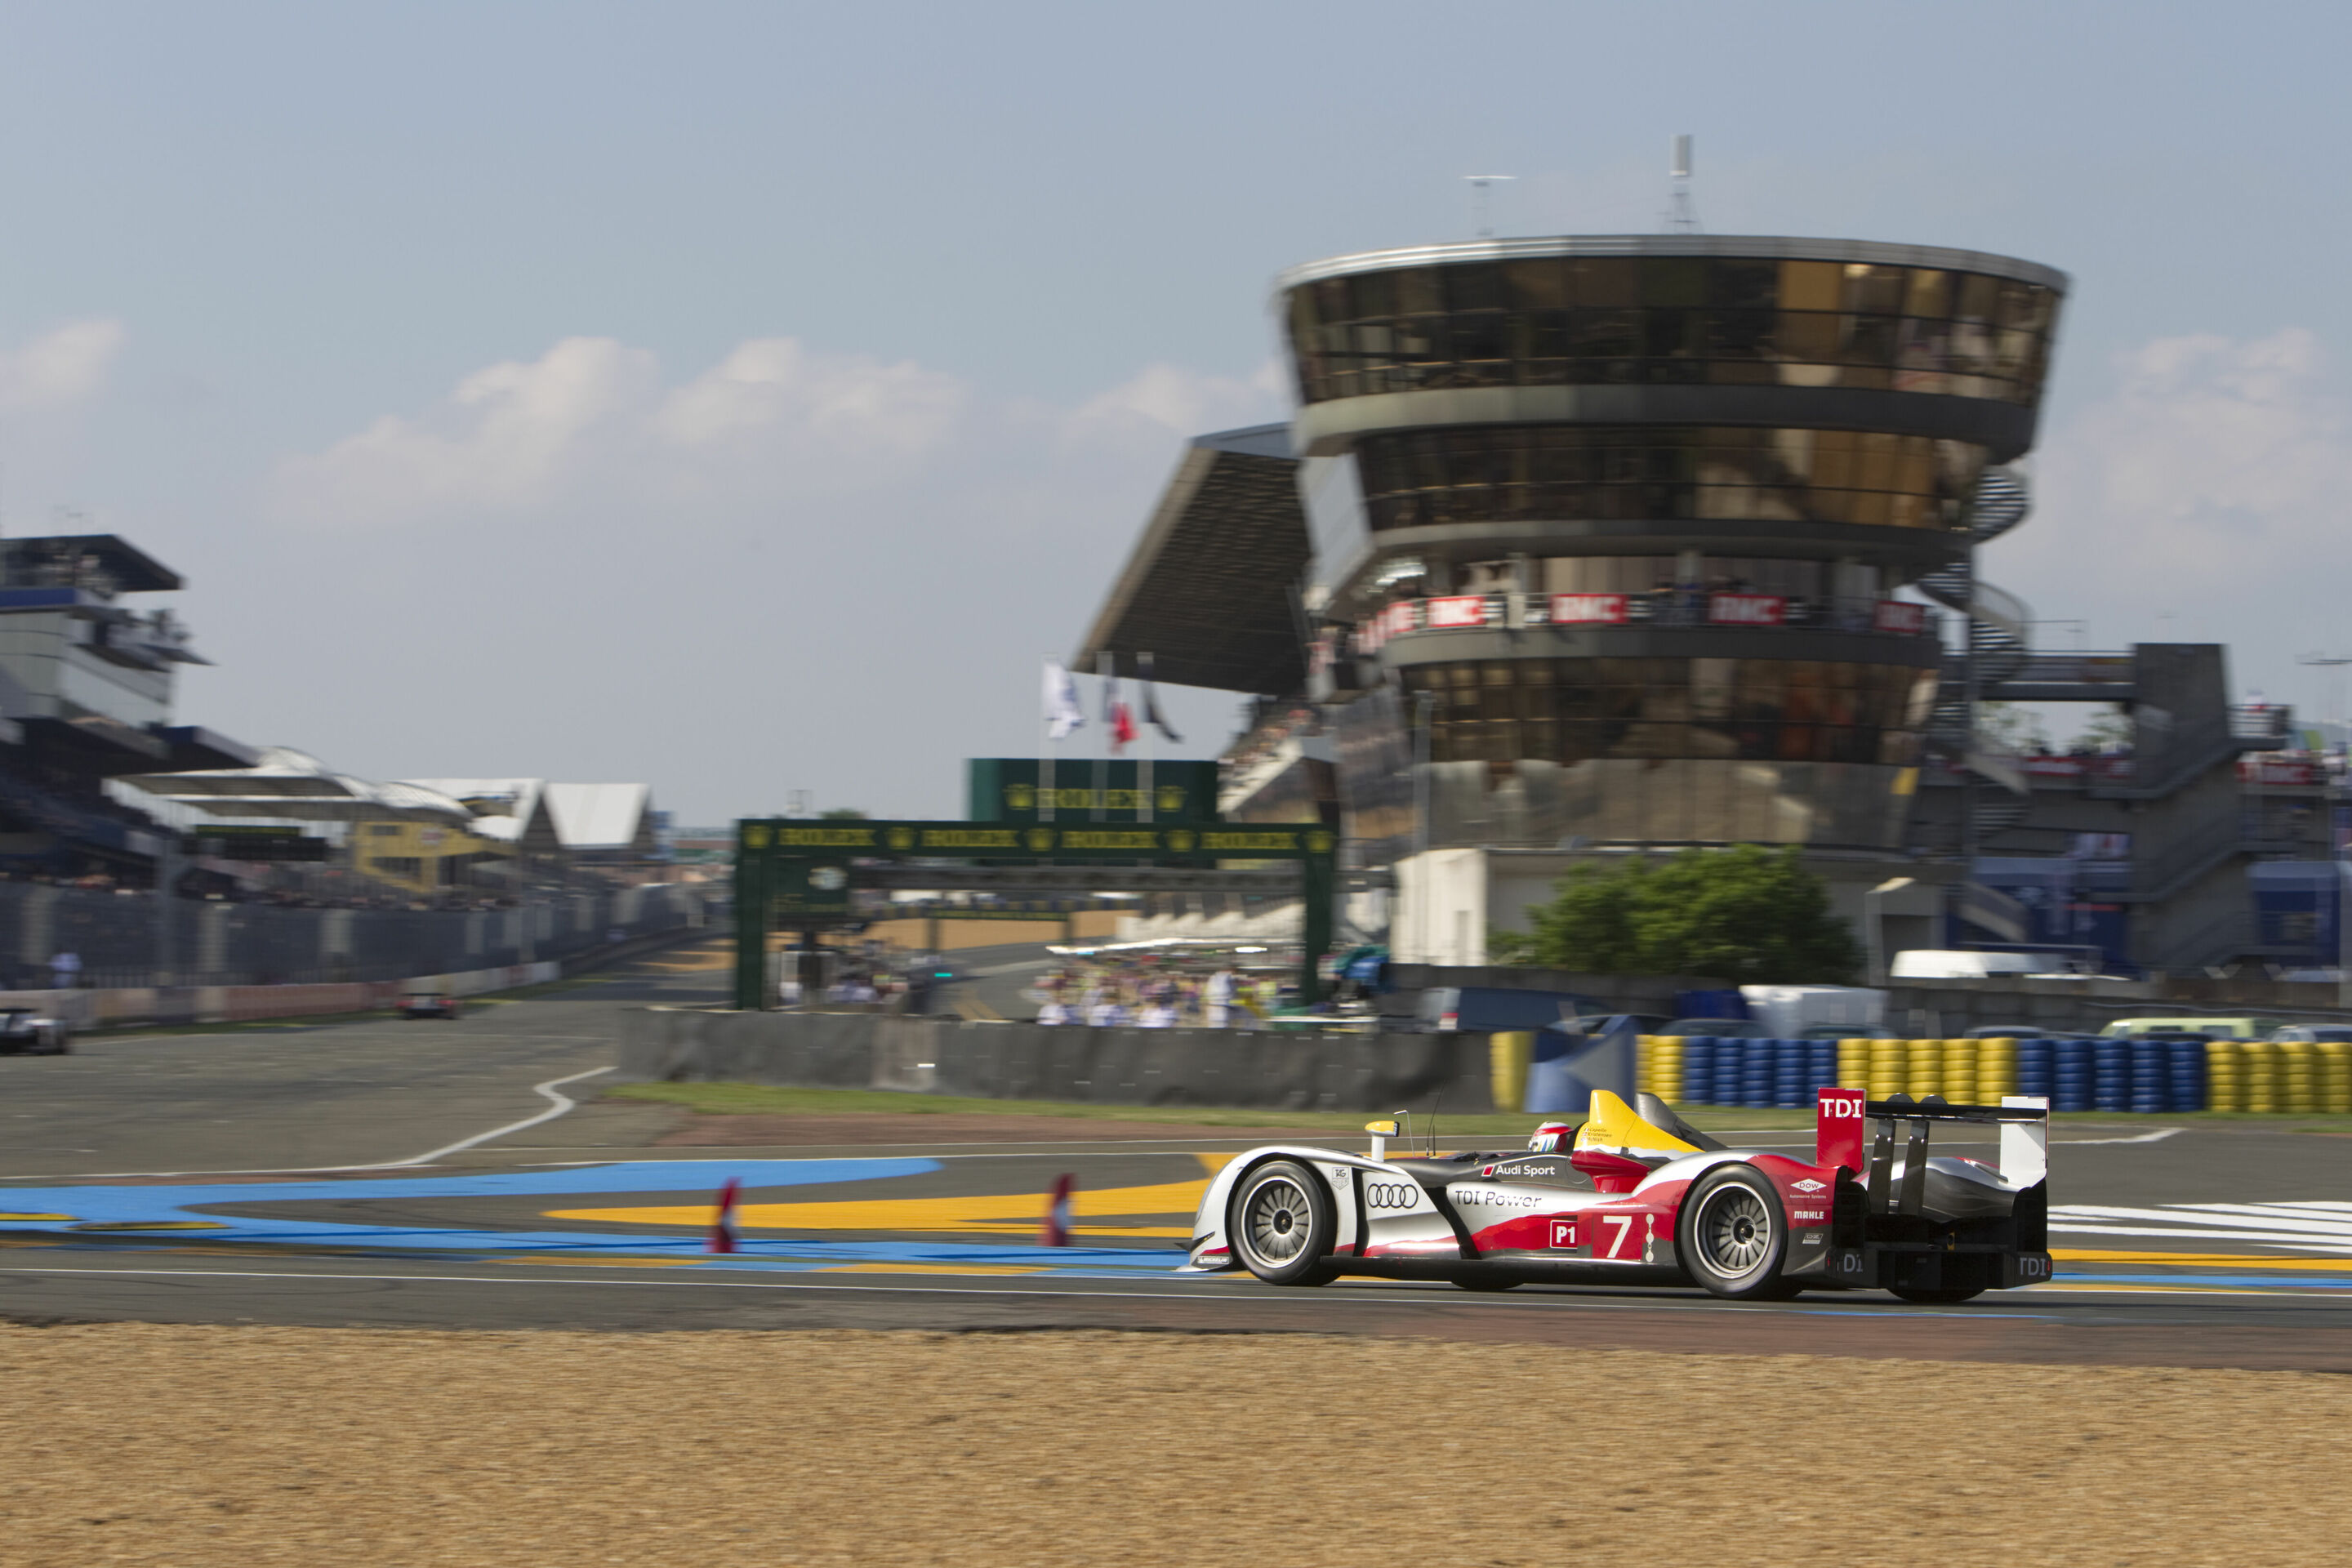 New book from Audi Tradition: “Audi at Le Mans”